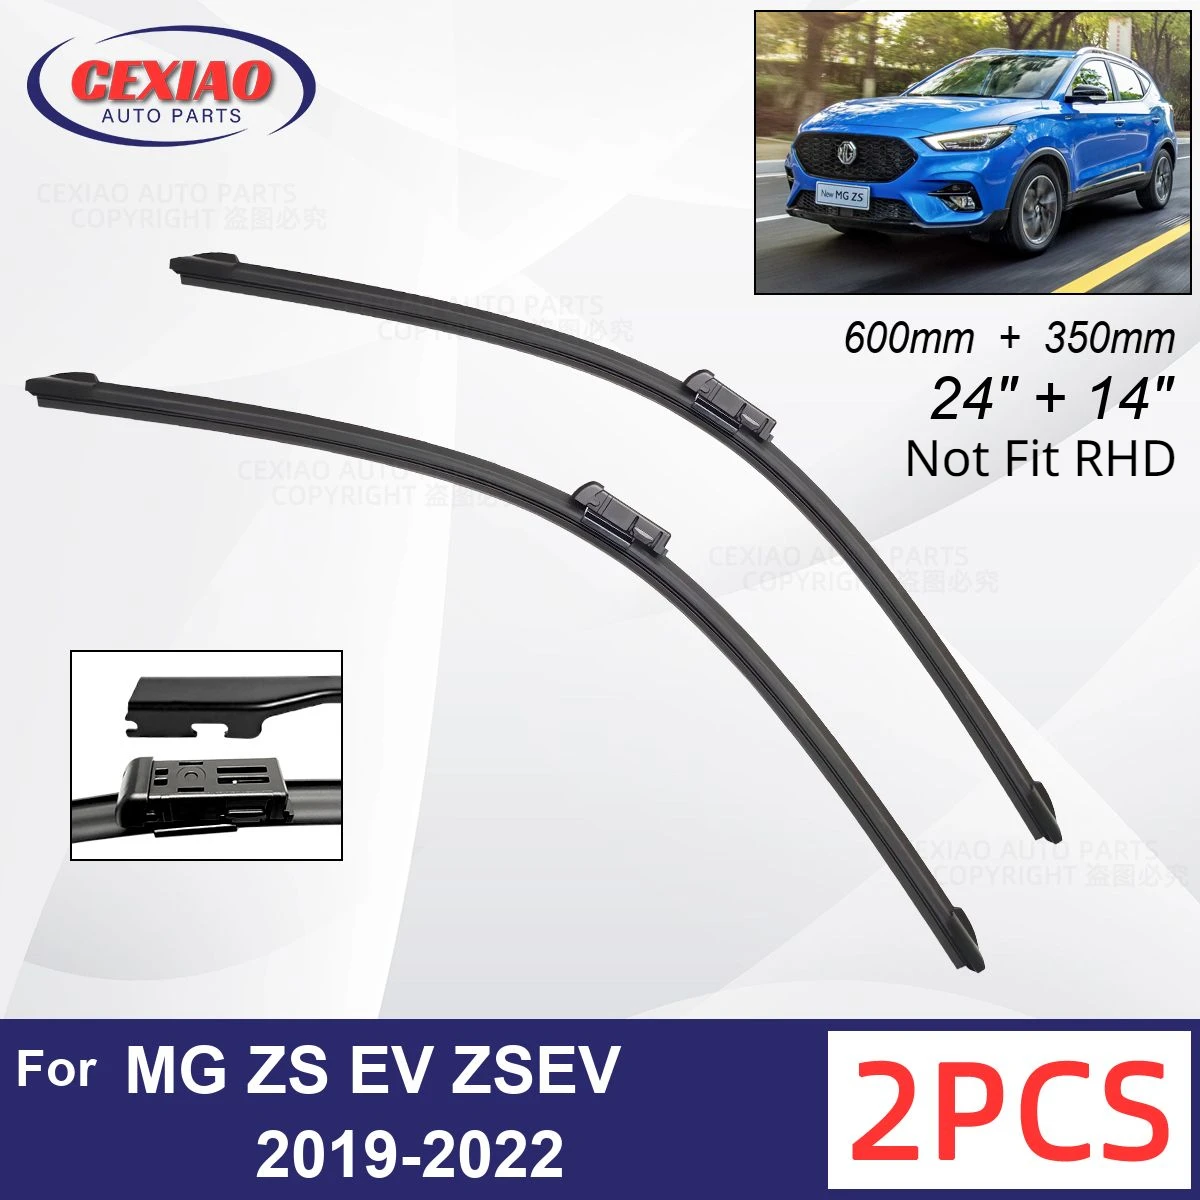 

Car Wiper For MG ZS EV ZSEV 2019-2022 Front Wiper Blades Soft Rubber Windscreen Wipers Auto Windshield 24" 14" 600mm 350mm